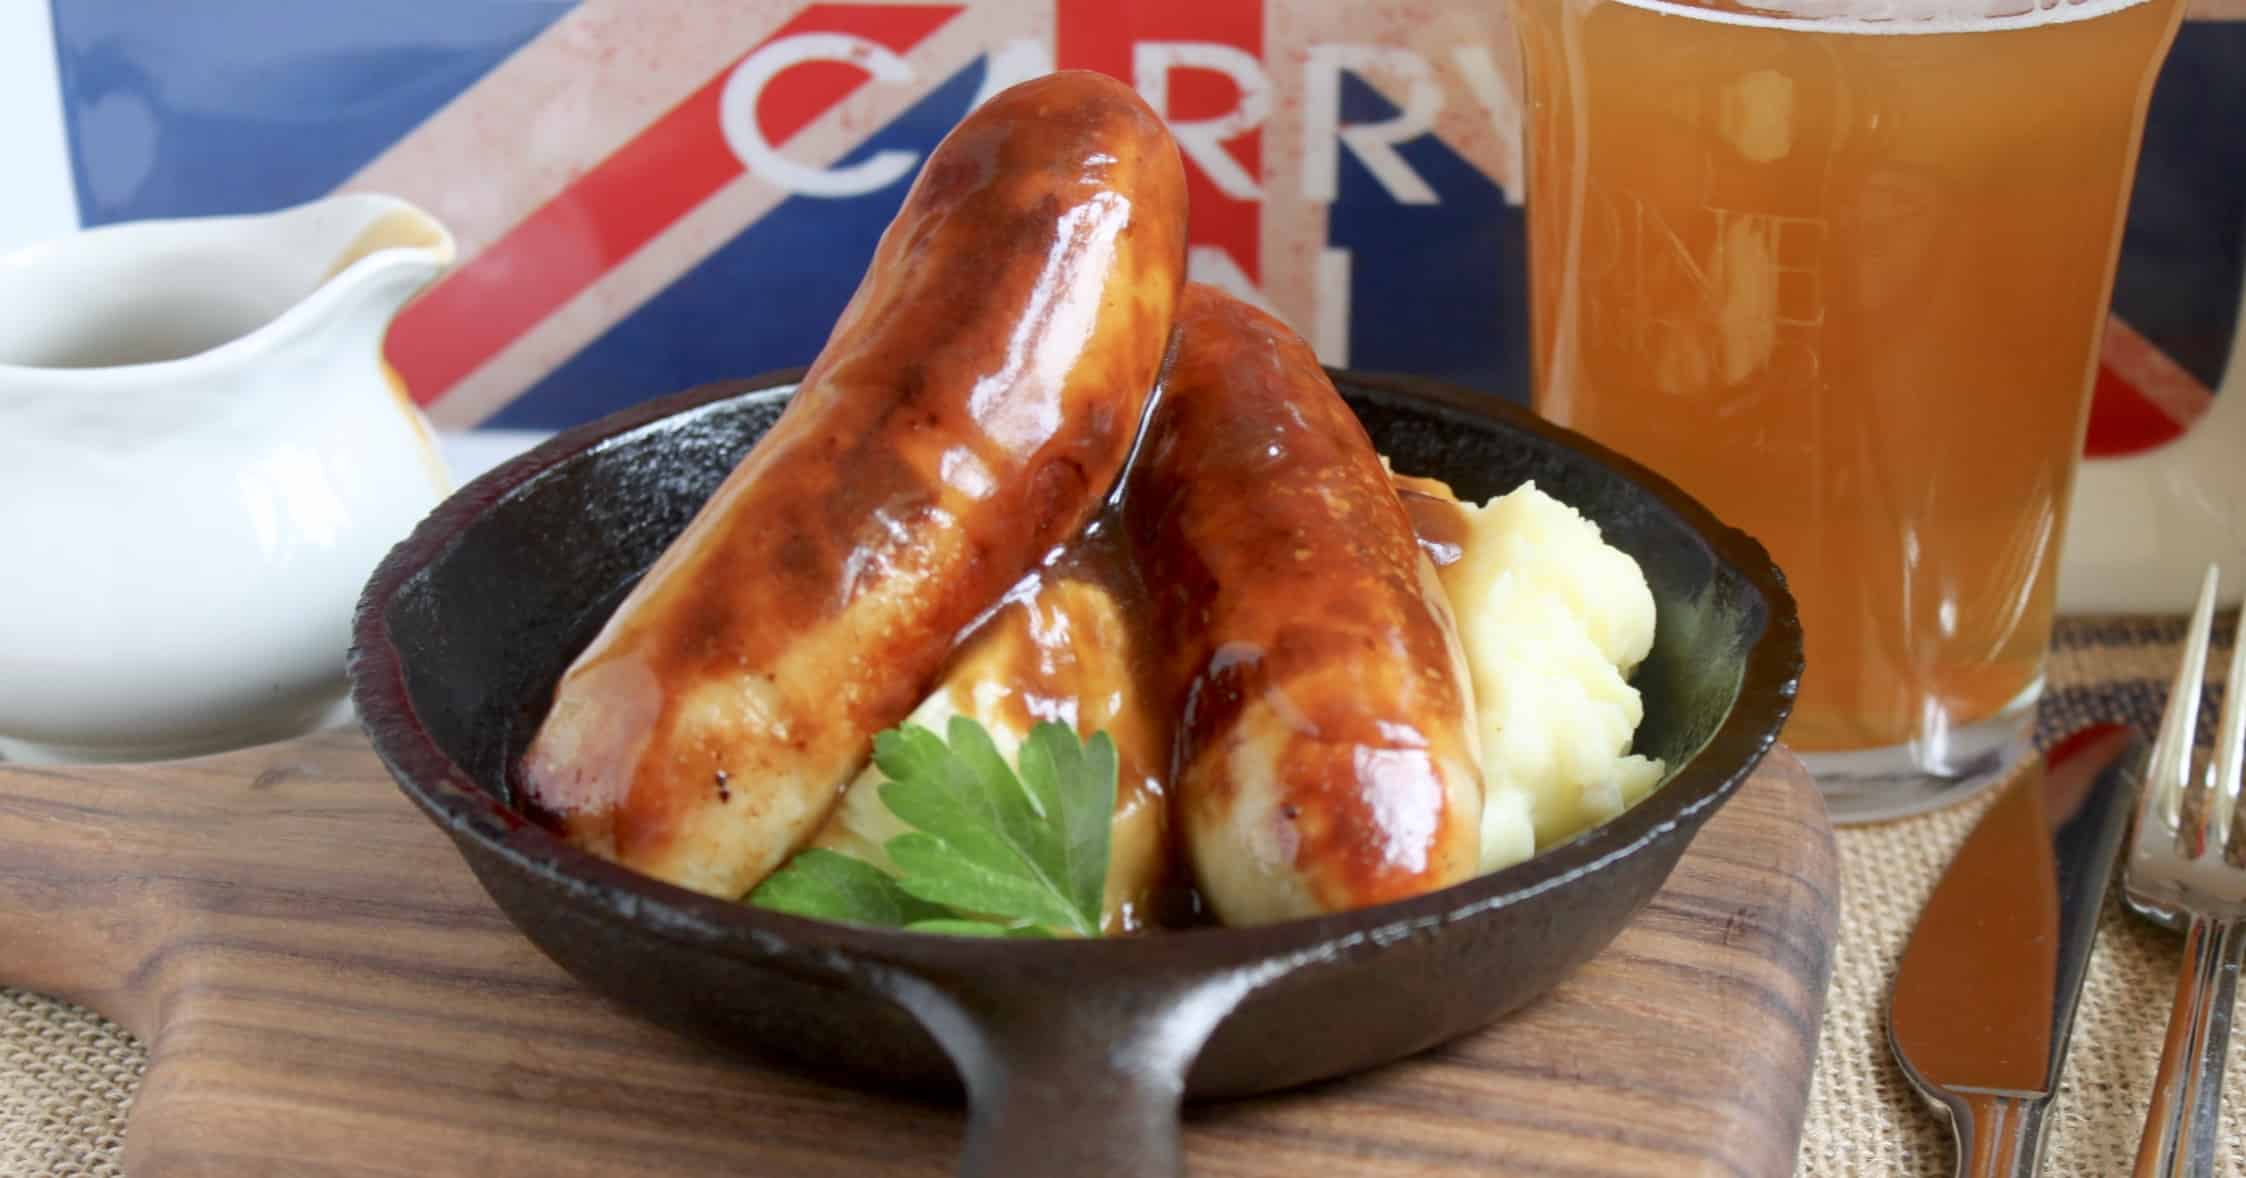 Bangers and Mash (Pub-style Sausages and Mash)